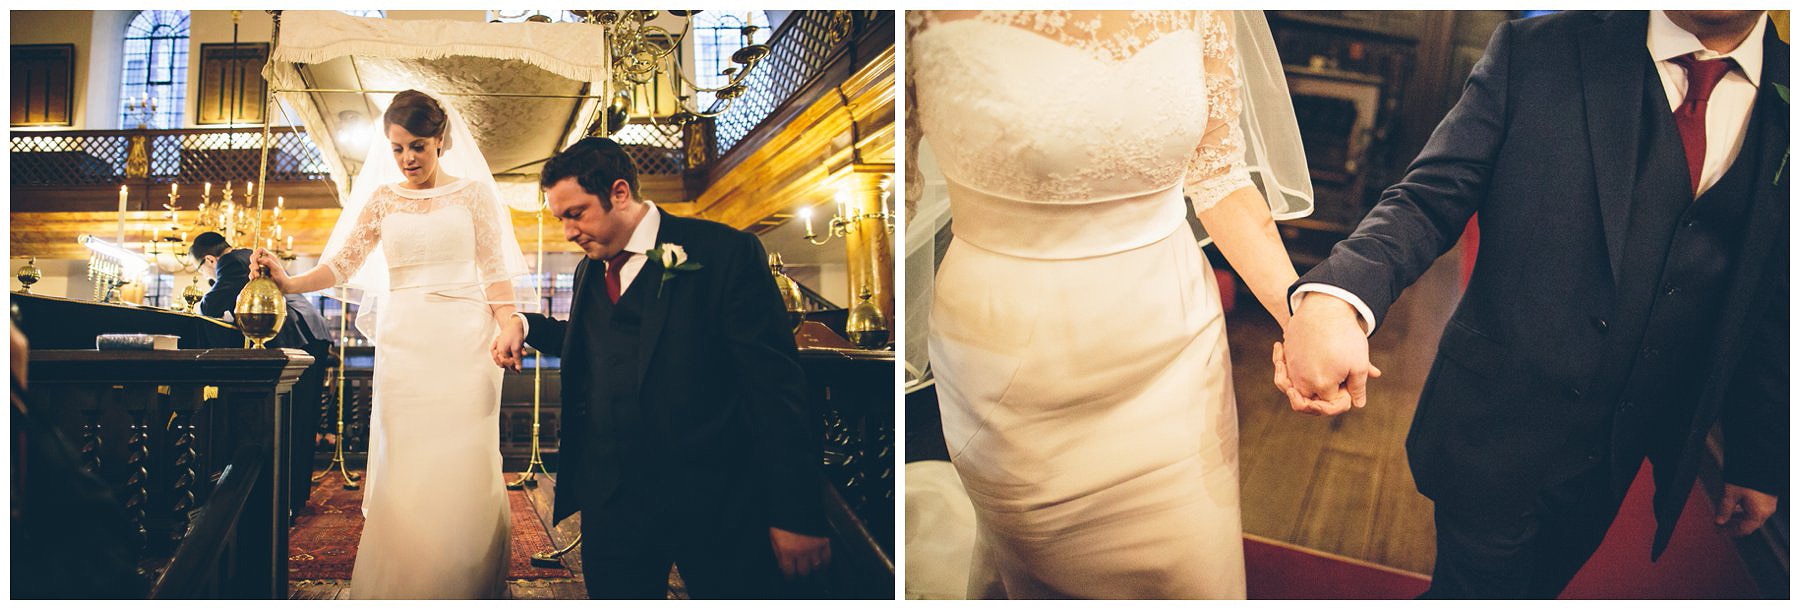 Bevis_Marks_Synagogue_Wedding_Photography_0064